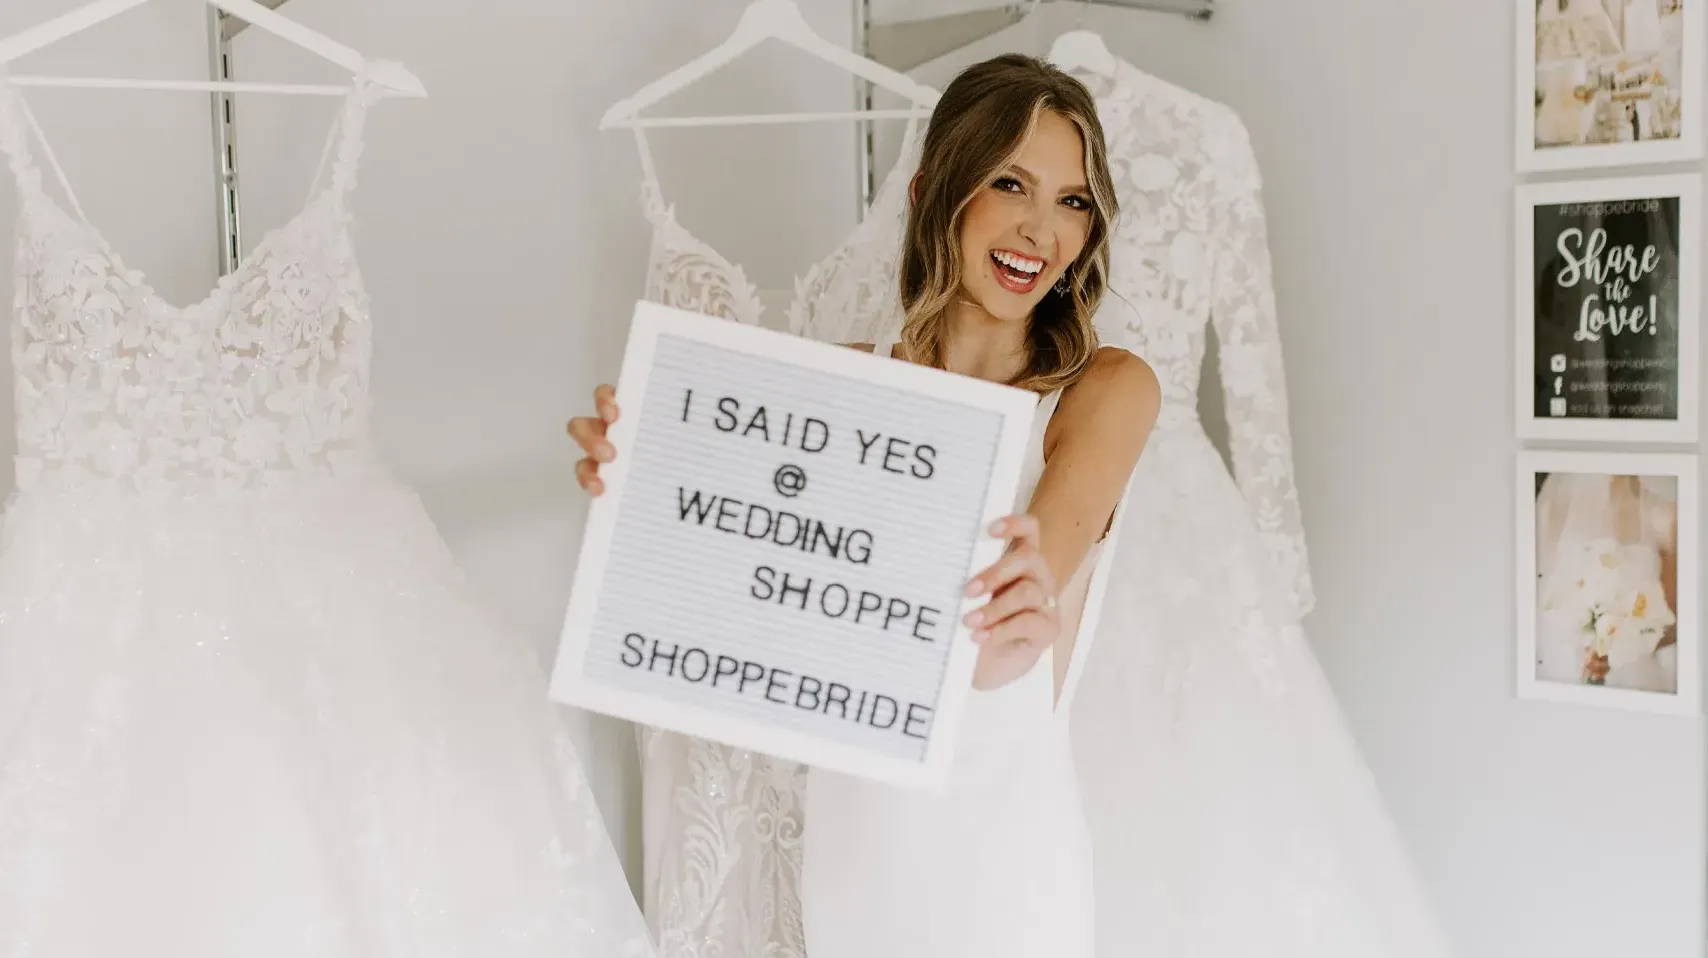 I Said Yes to the Dress at the Wedding Shoppe!